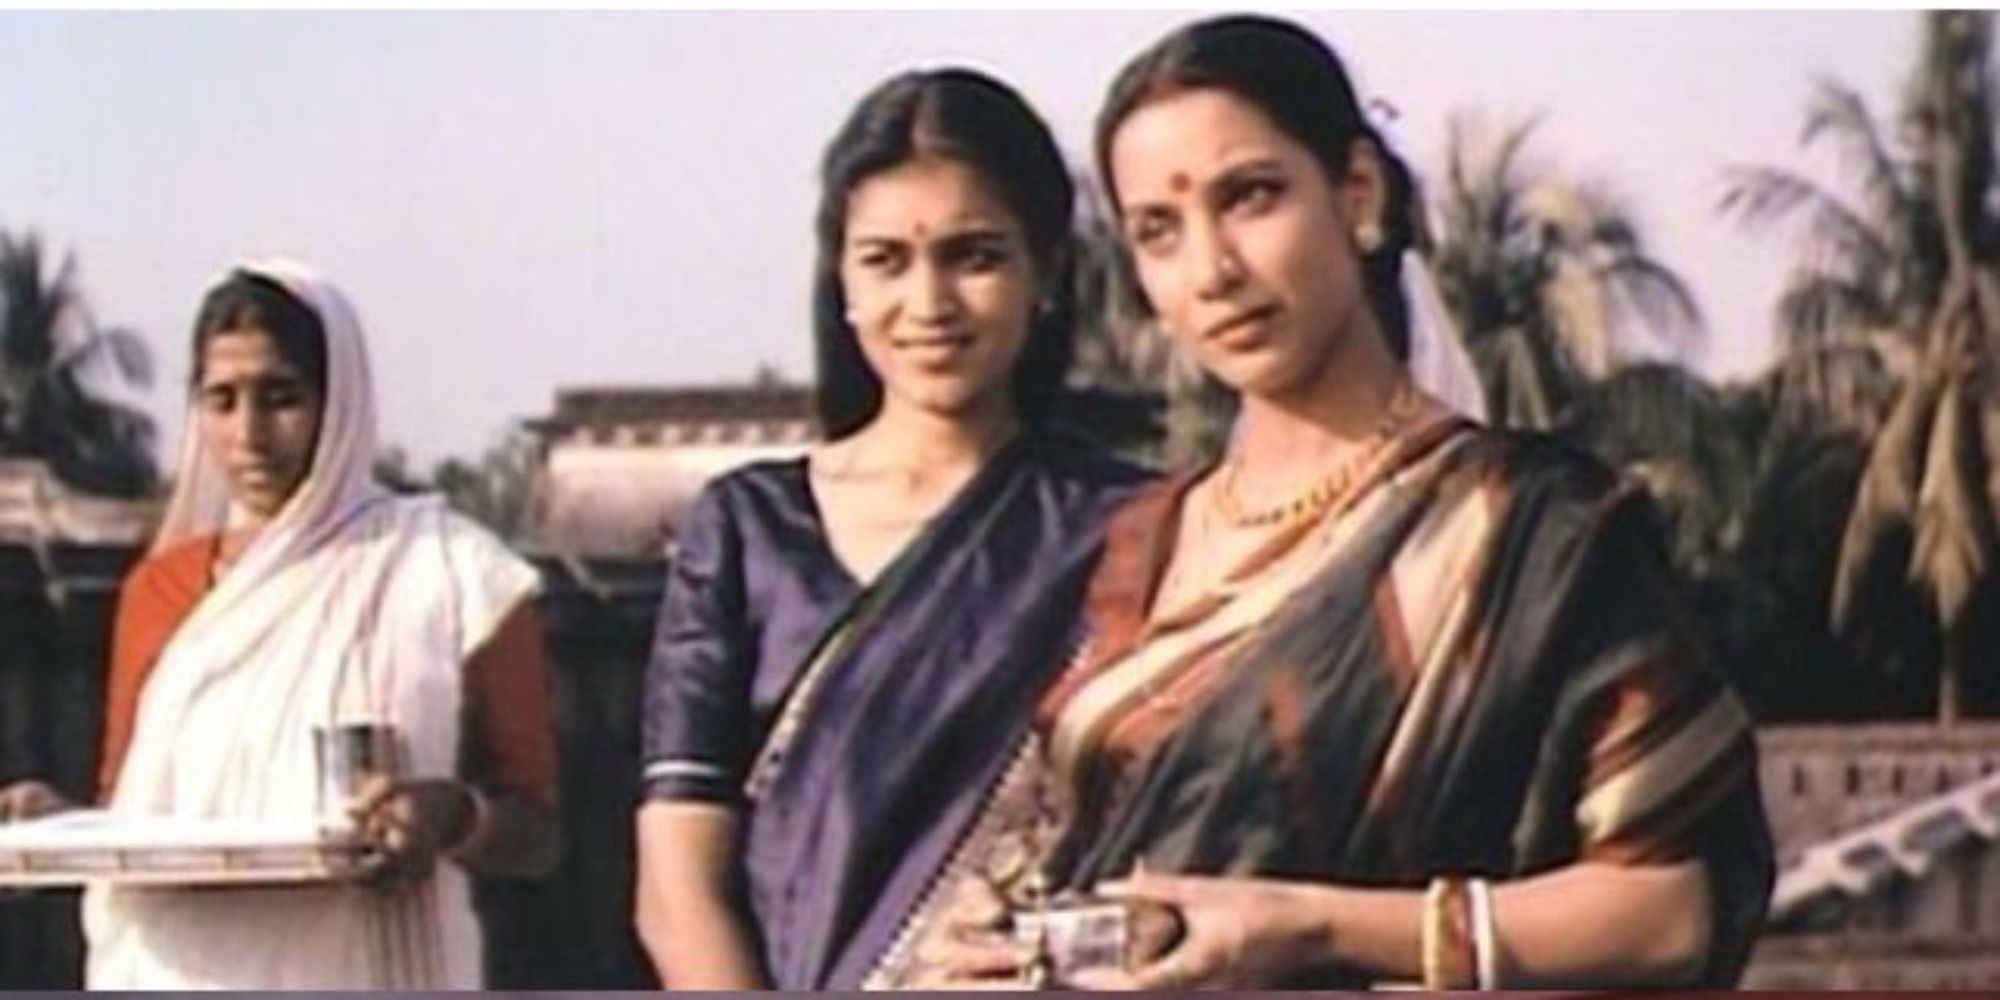 Image Of Shabana Azmi In The Bengali Nights Standing With Her Daughter Looking Off Into The Distance